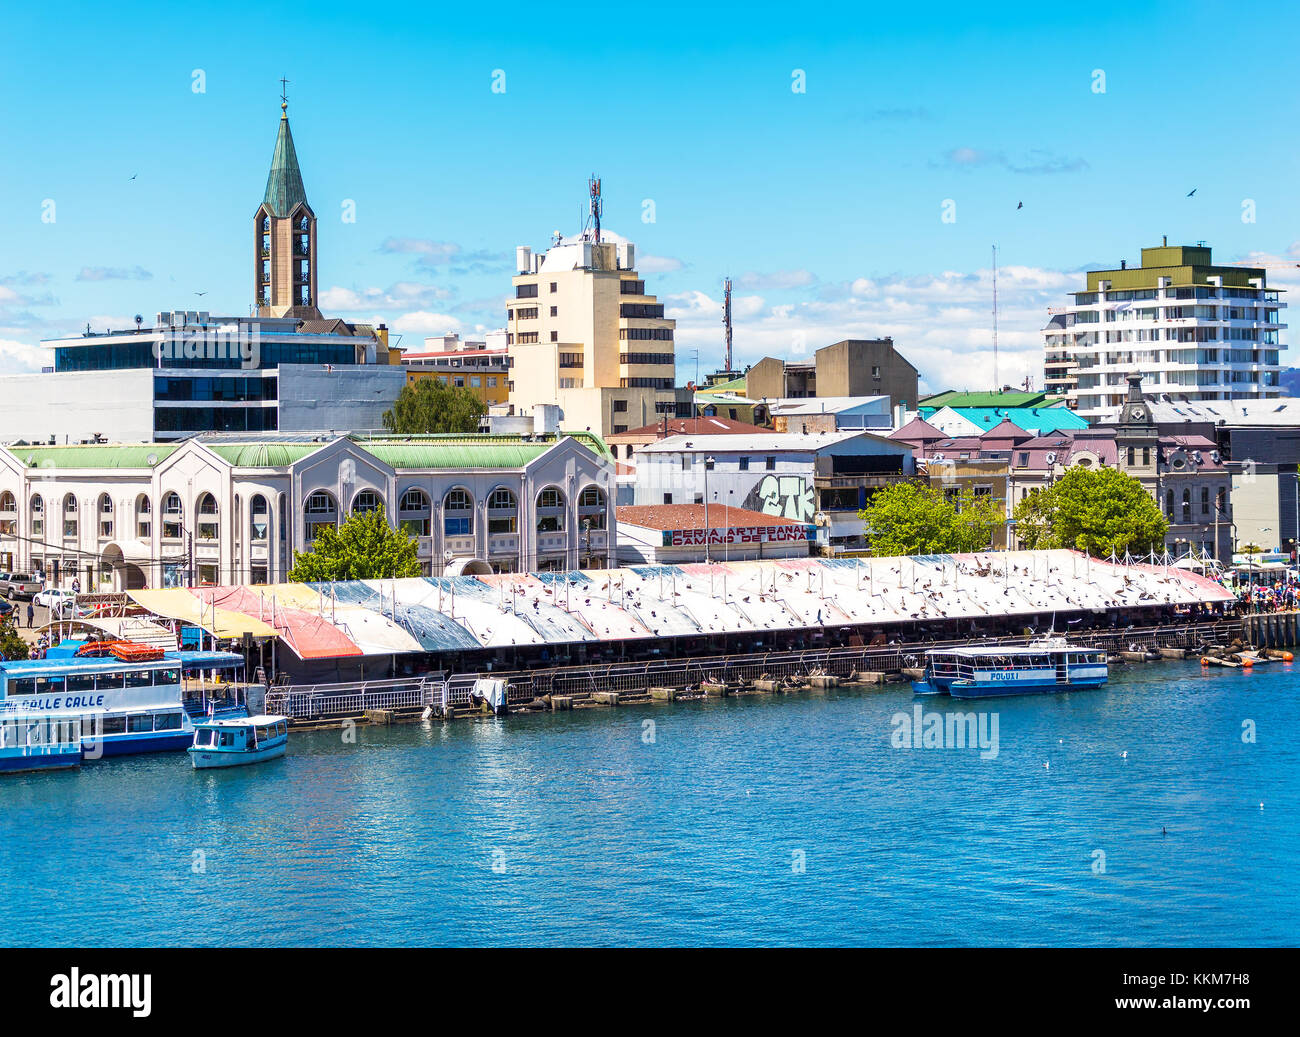 VALDIVIA, CHILE - OCTOBER 30, 2016: View of the fish market in Valdivia. This is one of the main touristic attraction of the town. Stock Photo